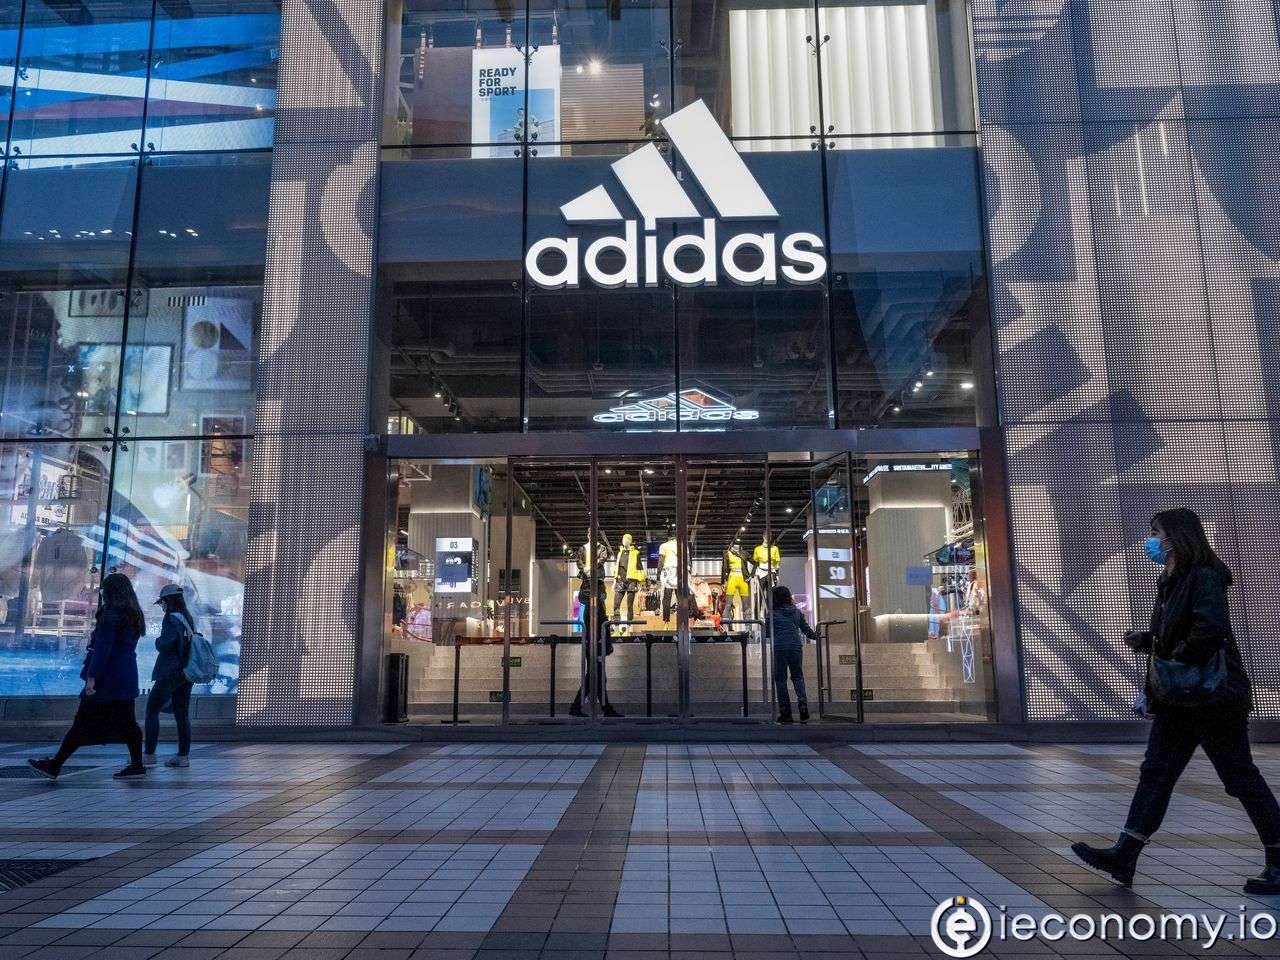 The ongoing delivery problems spoiled the third quarter for Adidas